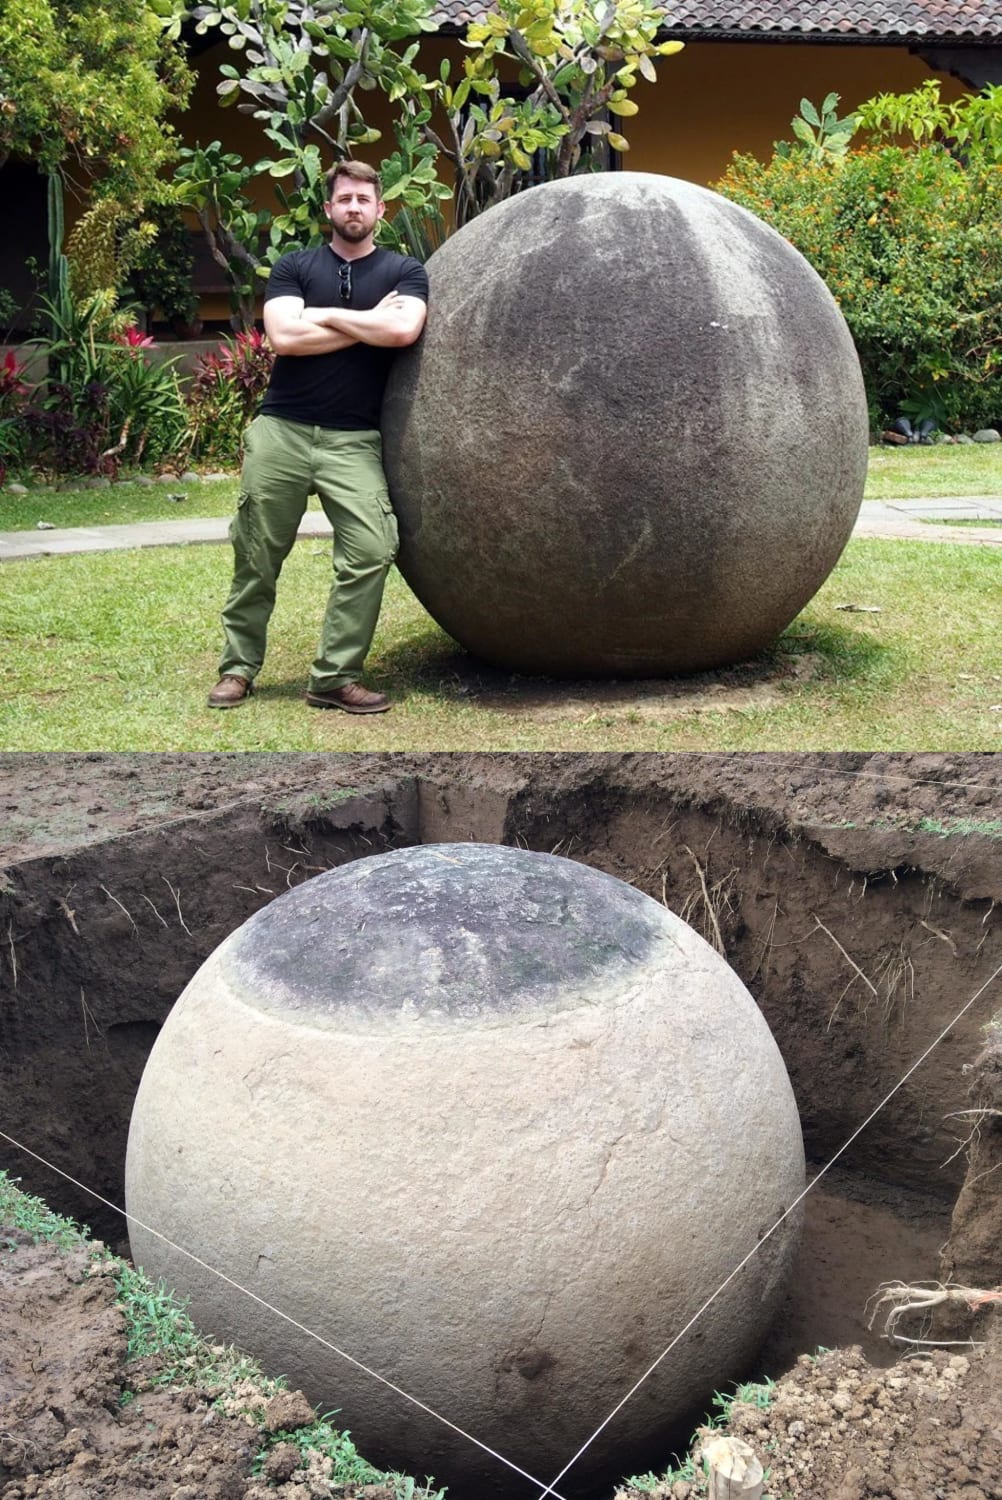 The stone spheres of Costa Rica are an assortment of over 300 petrospheres, made between 600 and 1500 CE, that are commonly attributed to the extinct Diquís culture. The spheres range in size from a few centimetres to over 2 metres in diameter, and weigh up to 15 tons